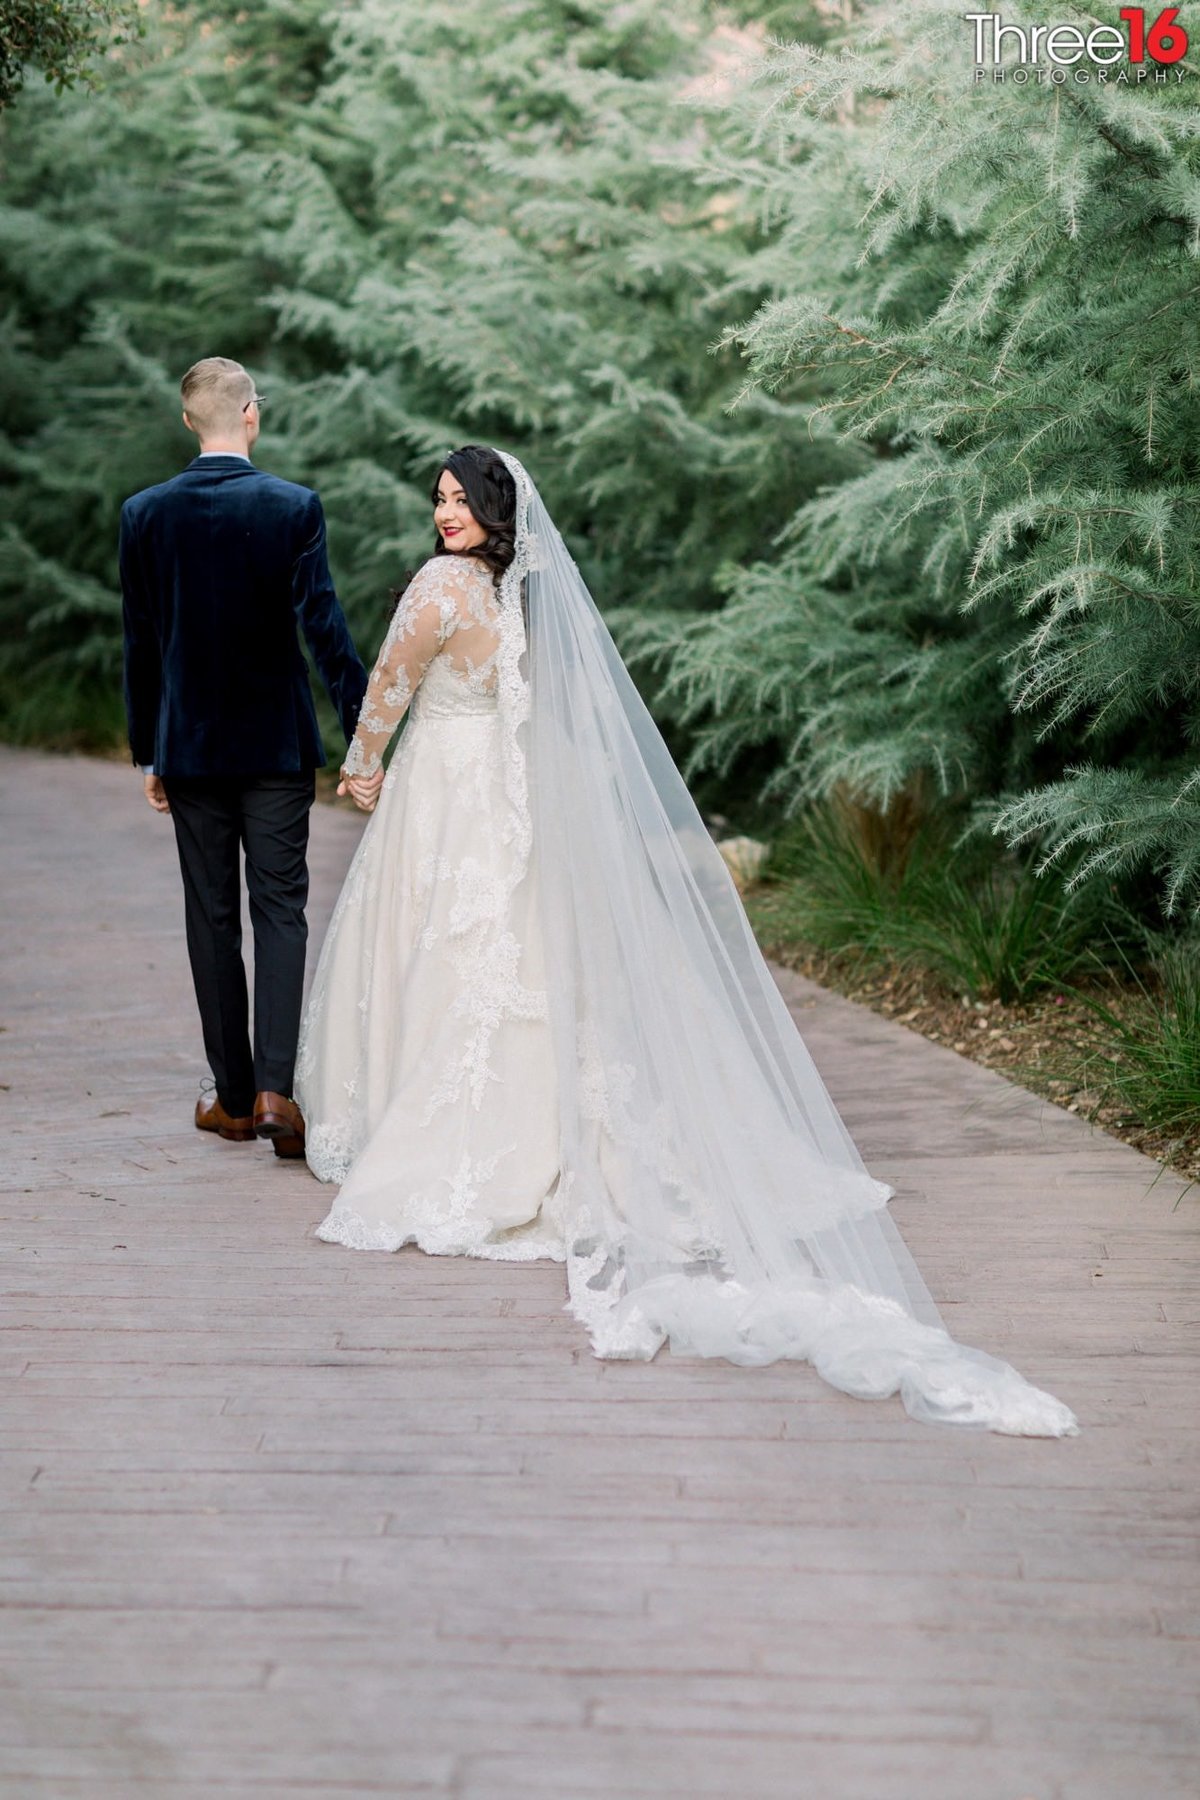 Bride looks back as she walks hand in hand away down a path with her Groom